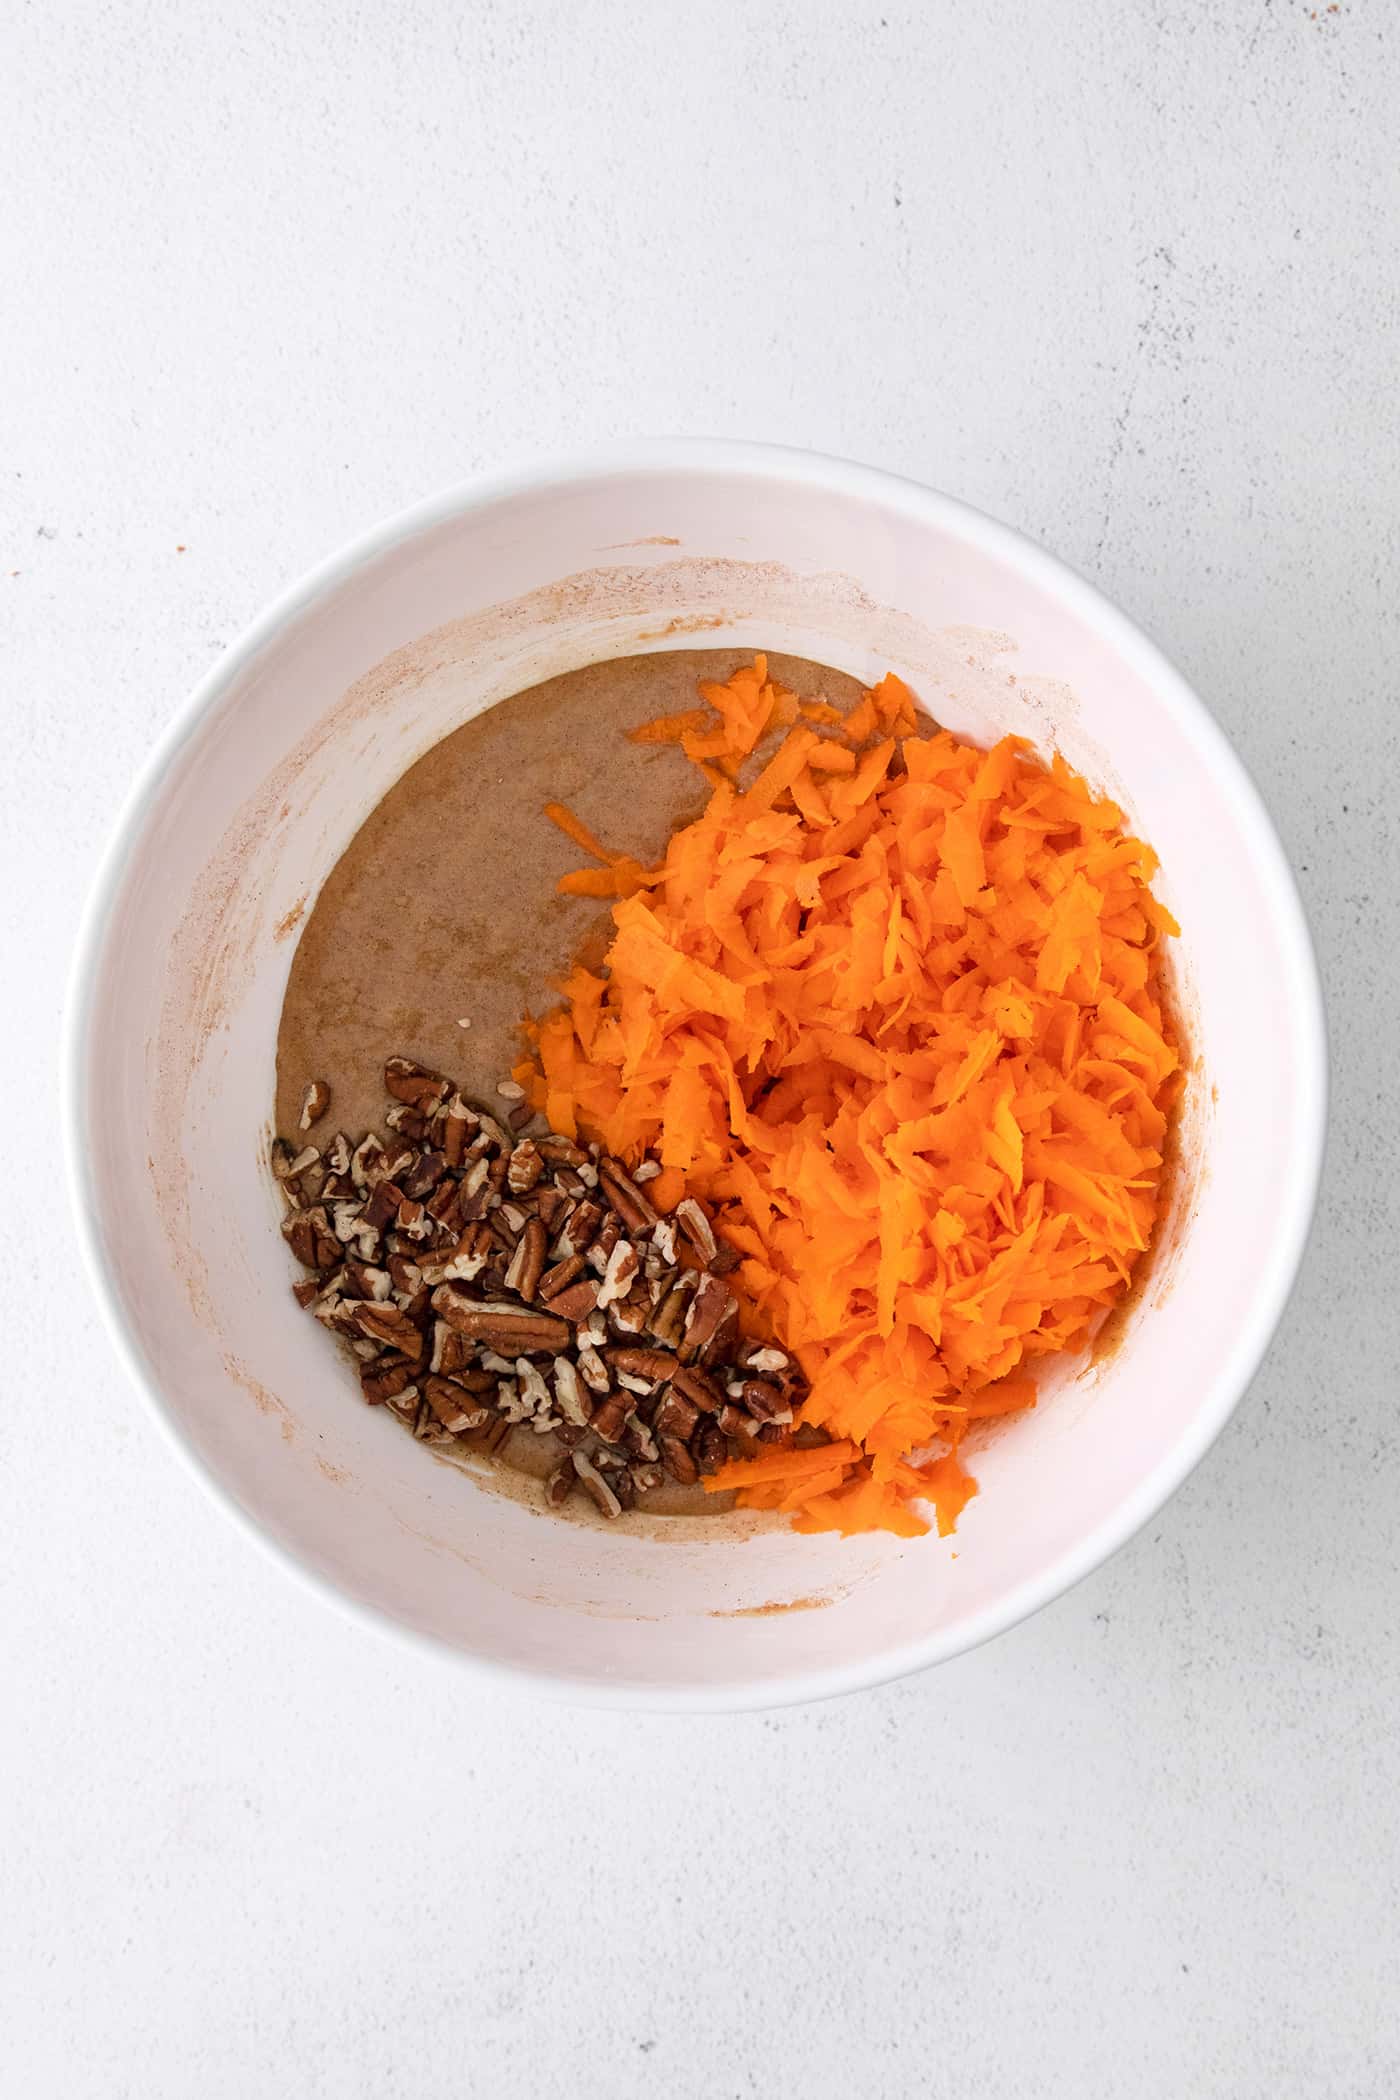 Cake batter, shredded carrots, and chopped nuts in a white bowl